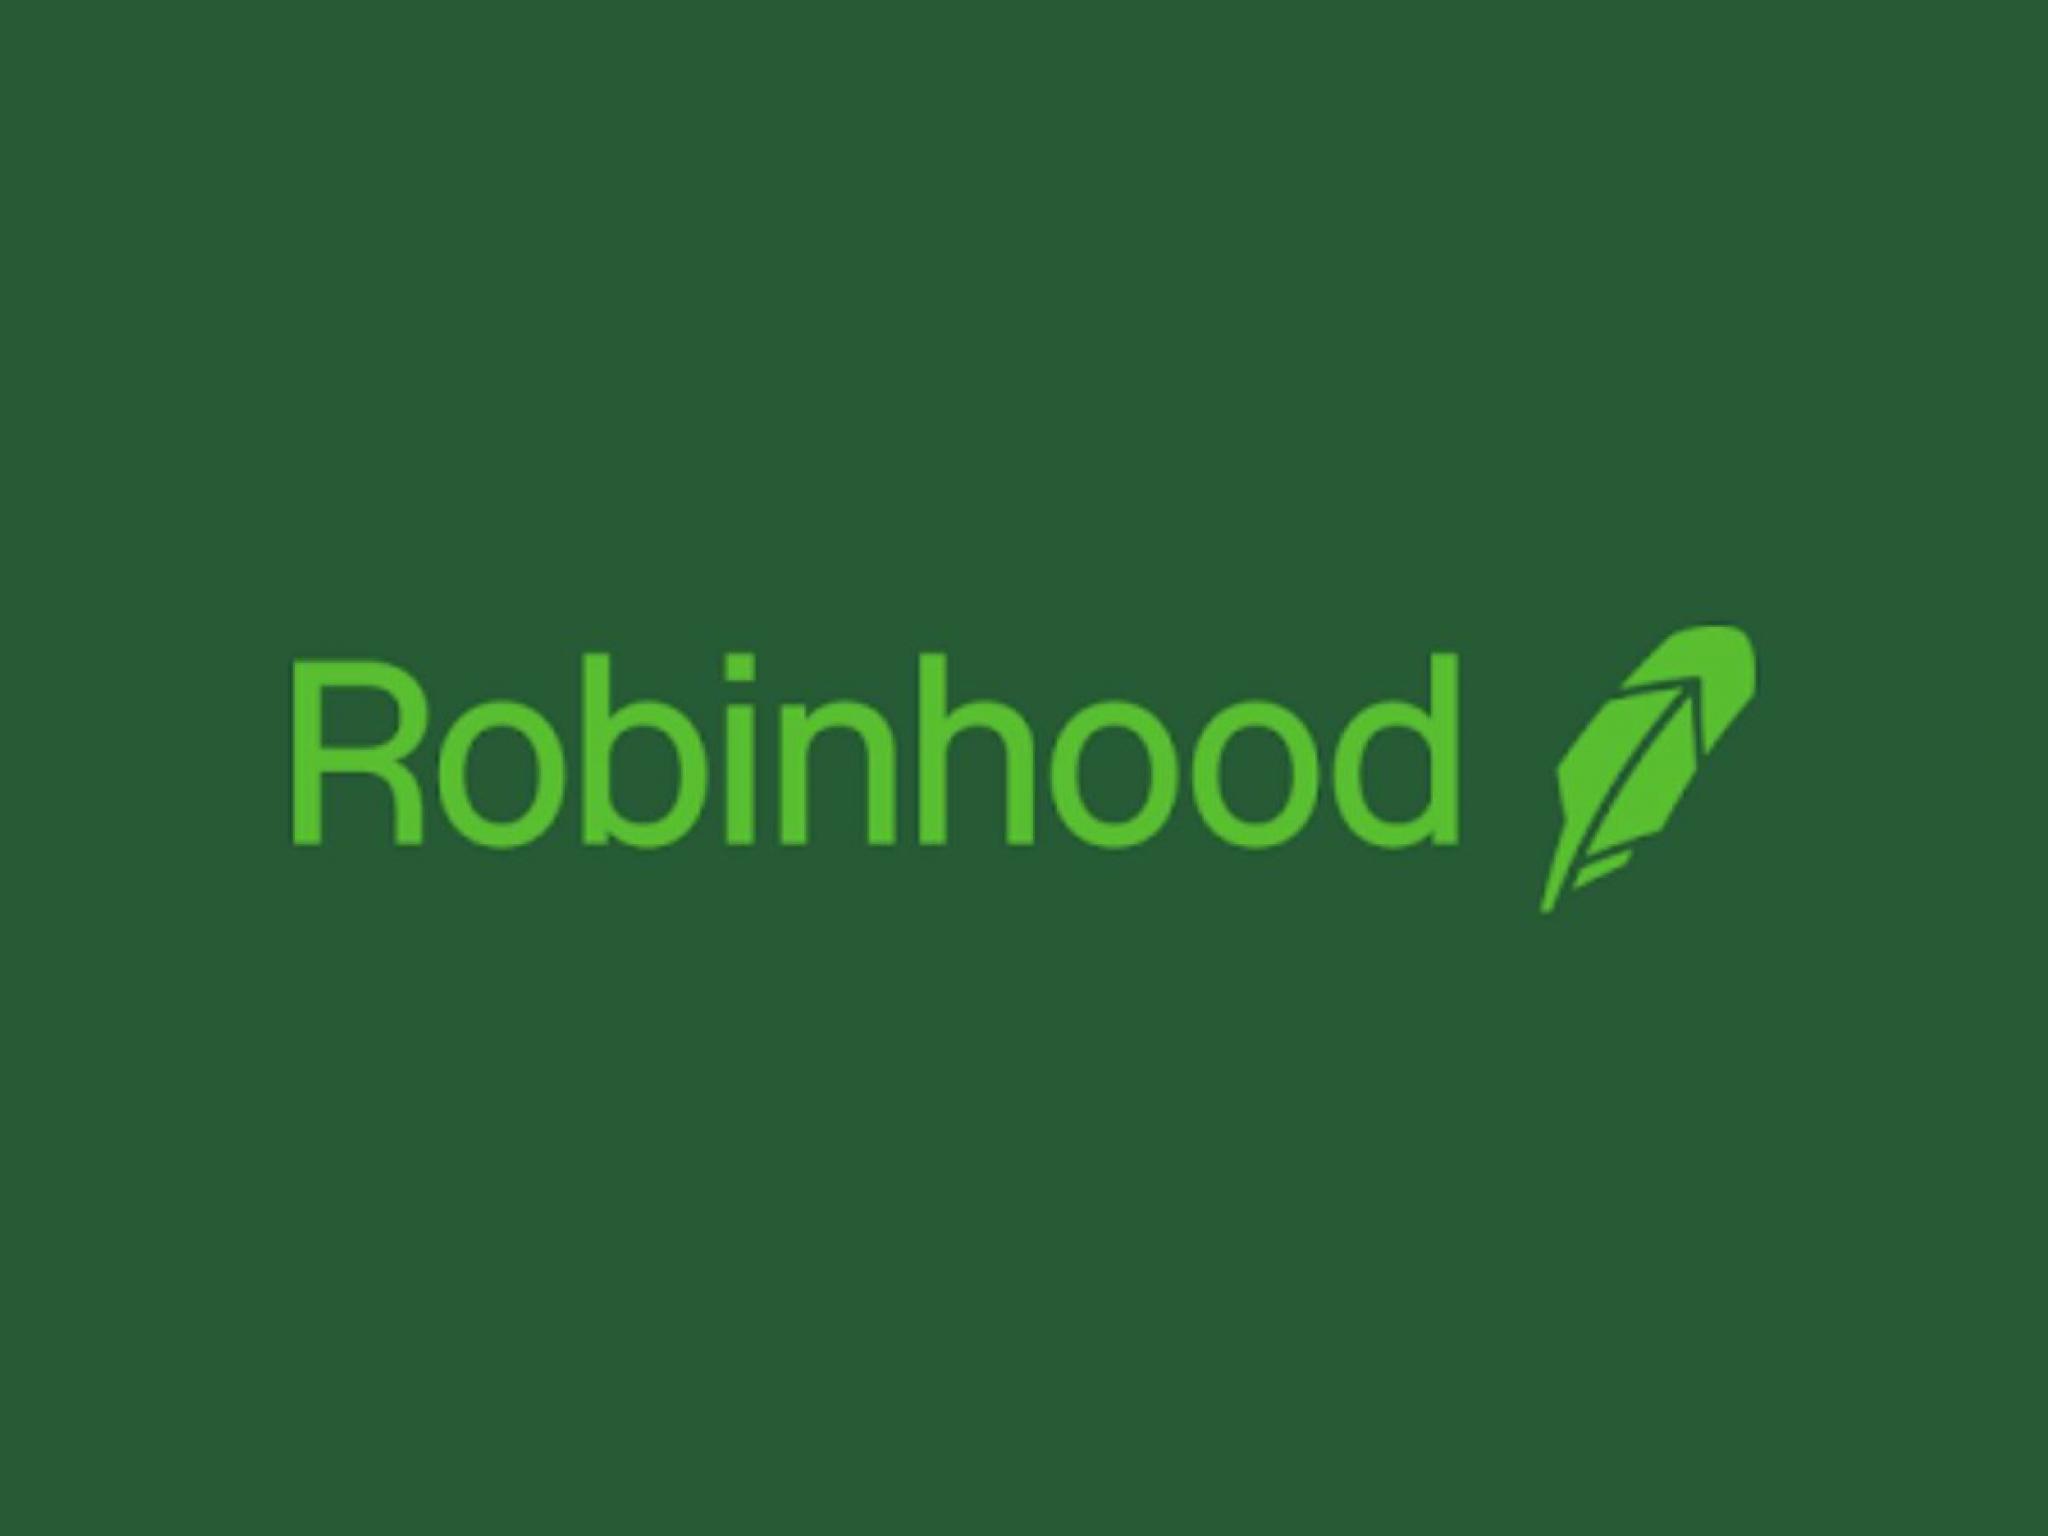  robinhood-palo-alto-networks-and-2-other-stocks-insiders-are-selling 